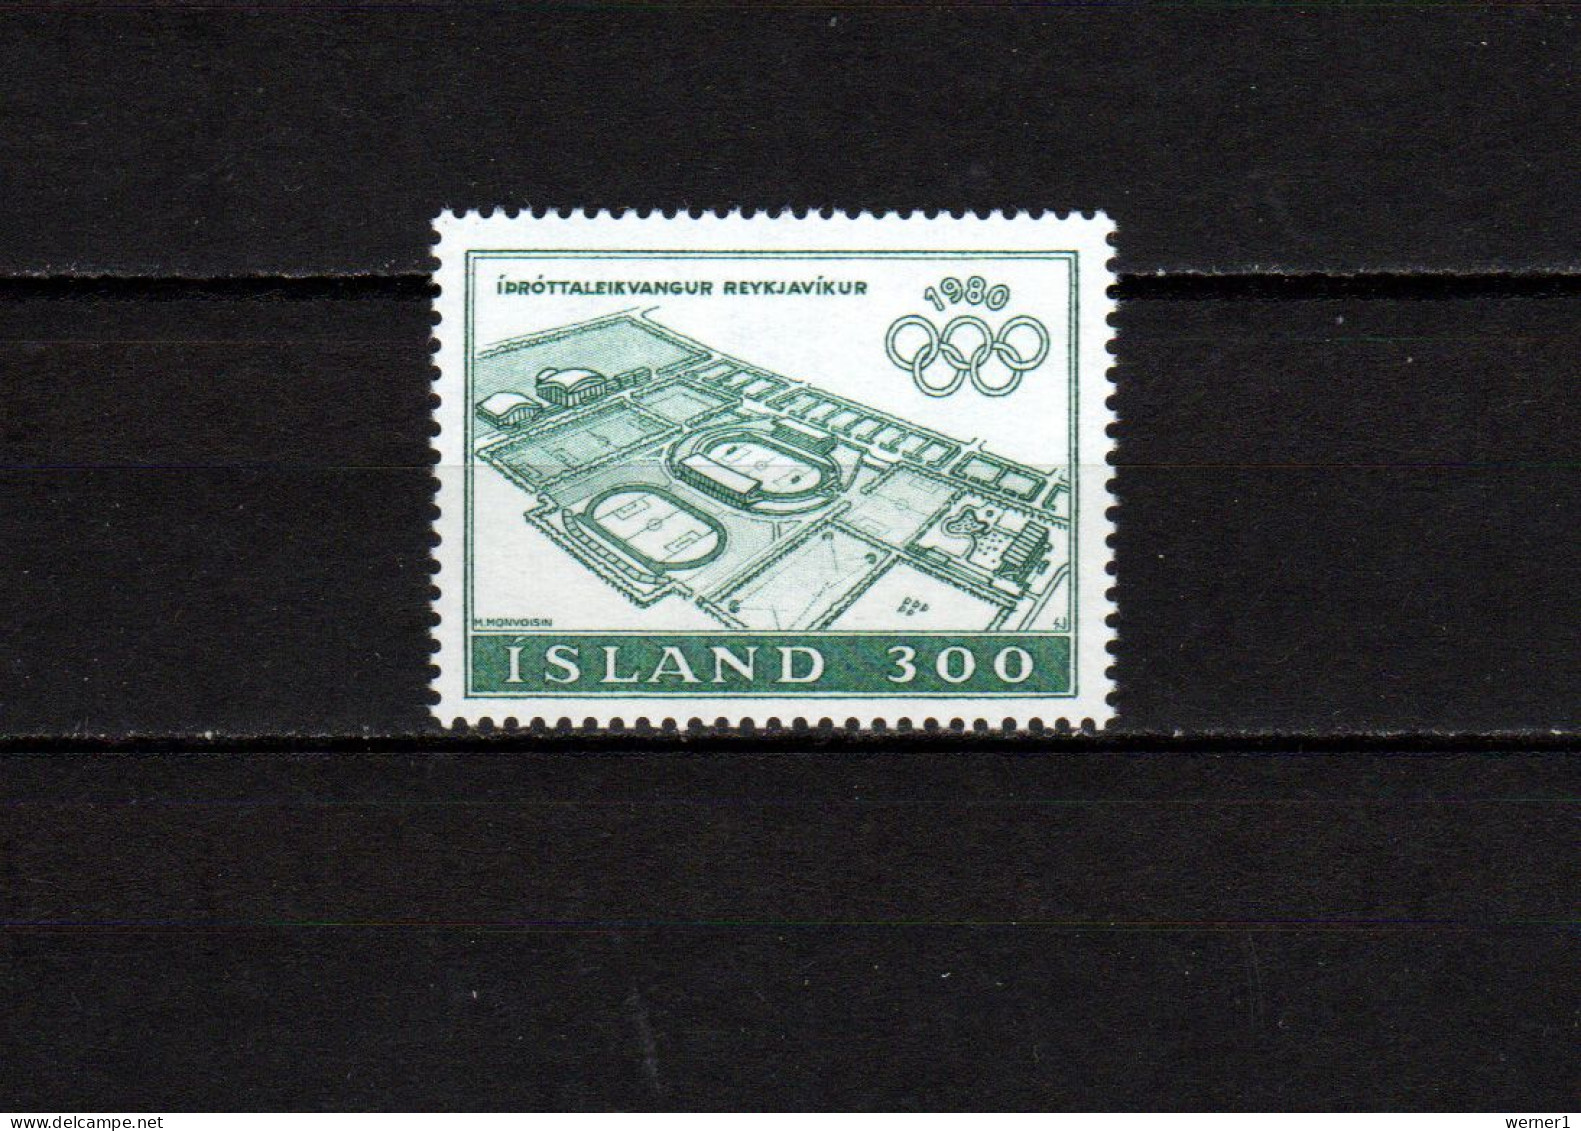 Iceland 1980 Olympic Games Moscow Stamp MNH - Zomer 1980: Moskou